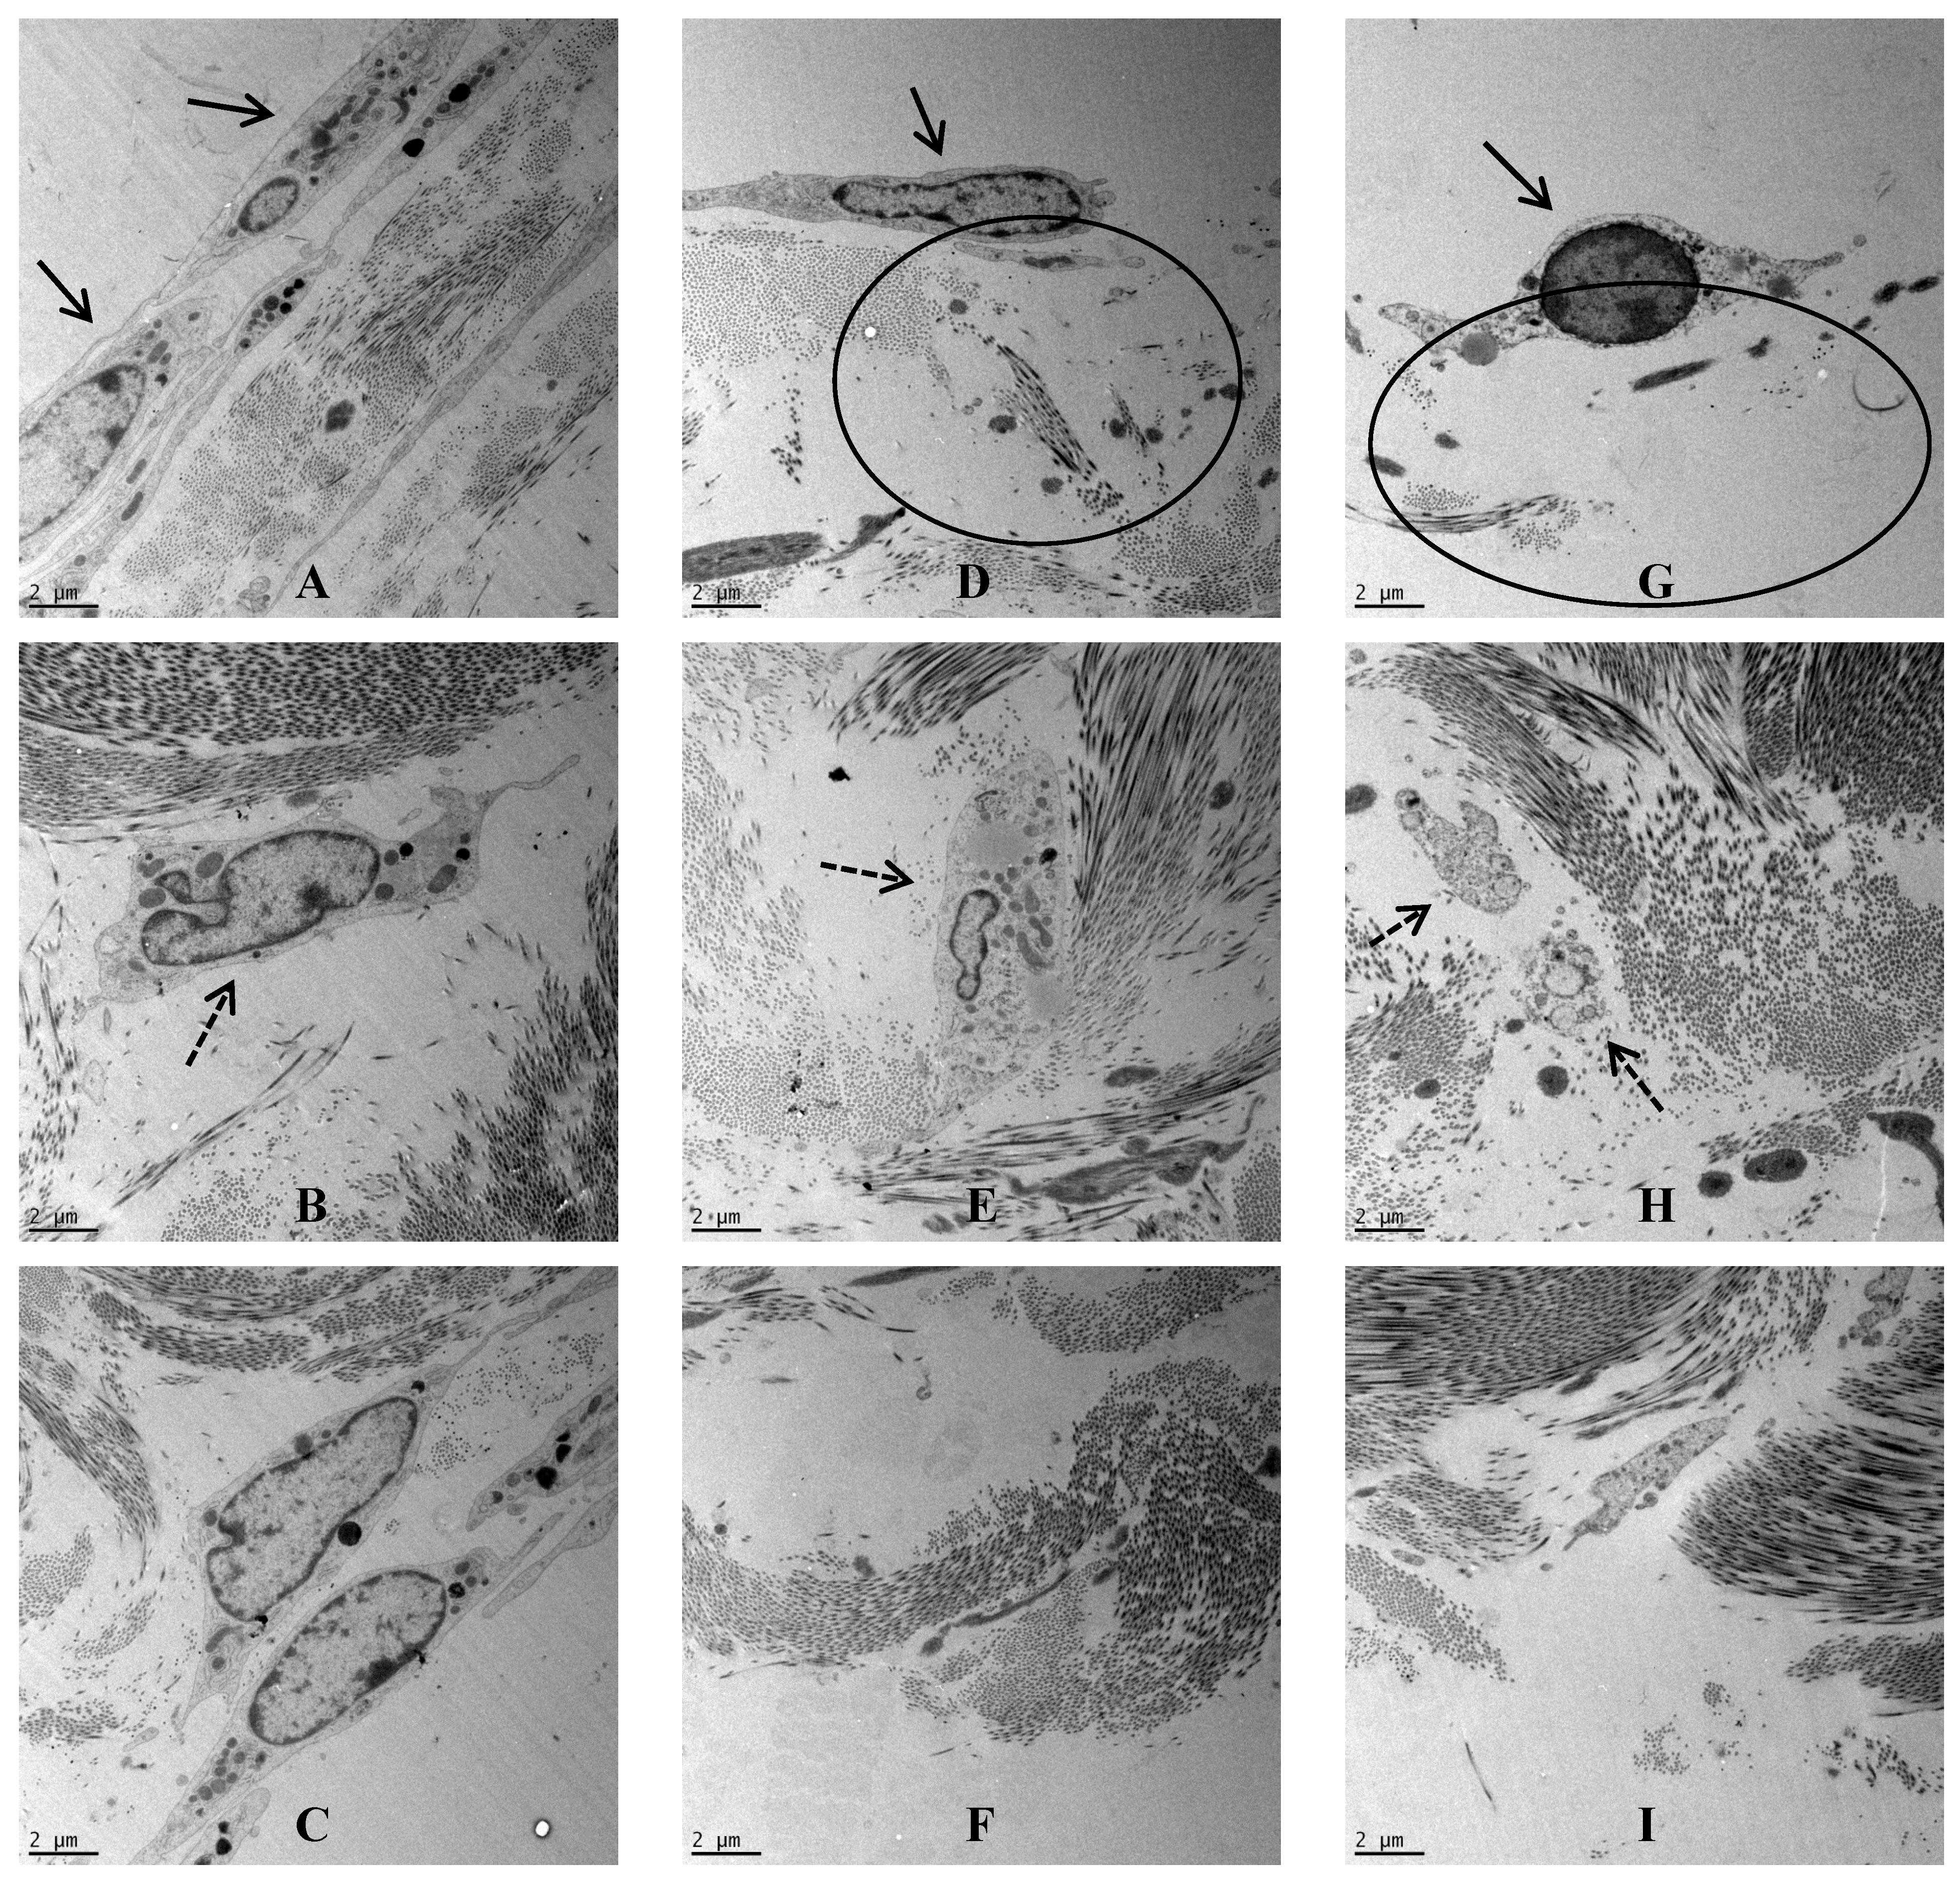 Regulation of MMP-3 expression and secretion by the chemokine eotaxin-1 in  human chondrocytes, Journal of Biomedical Science